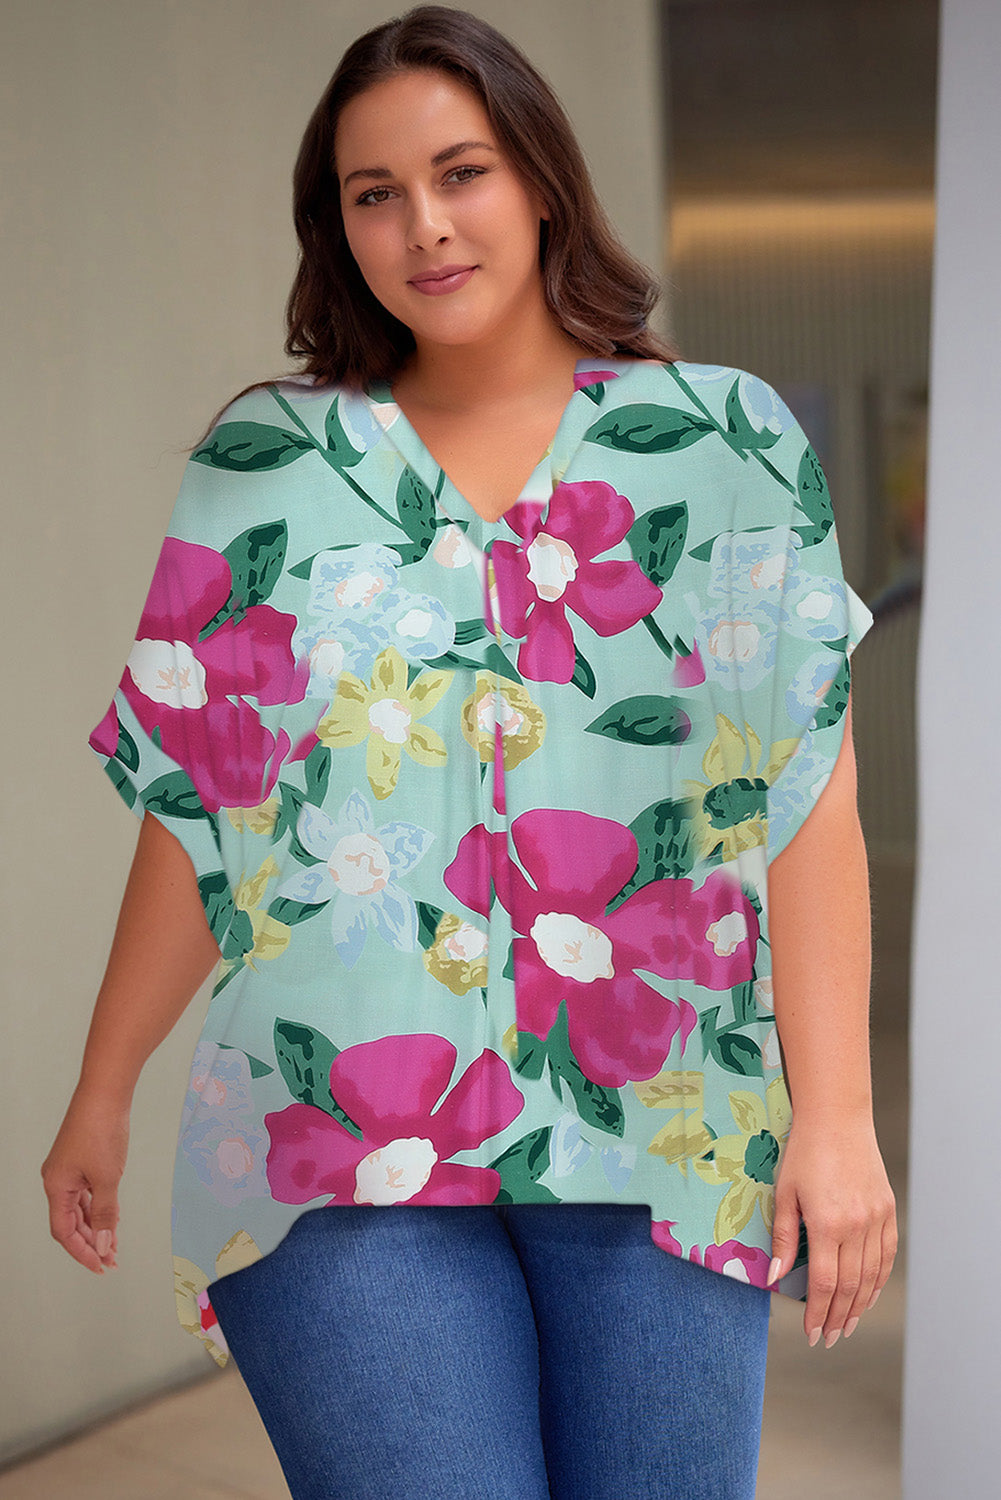 Plus Size Printed Notched Neck Half Sleeve Top